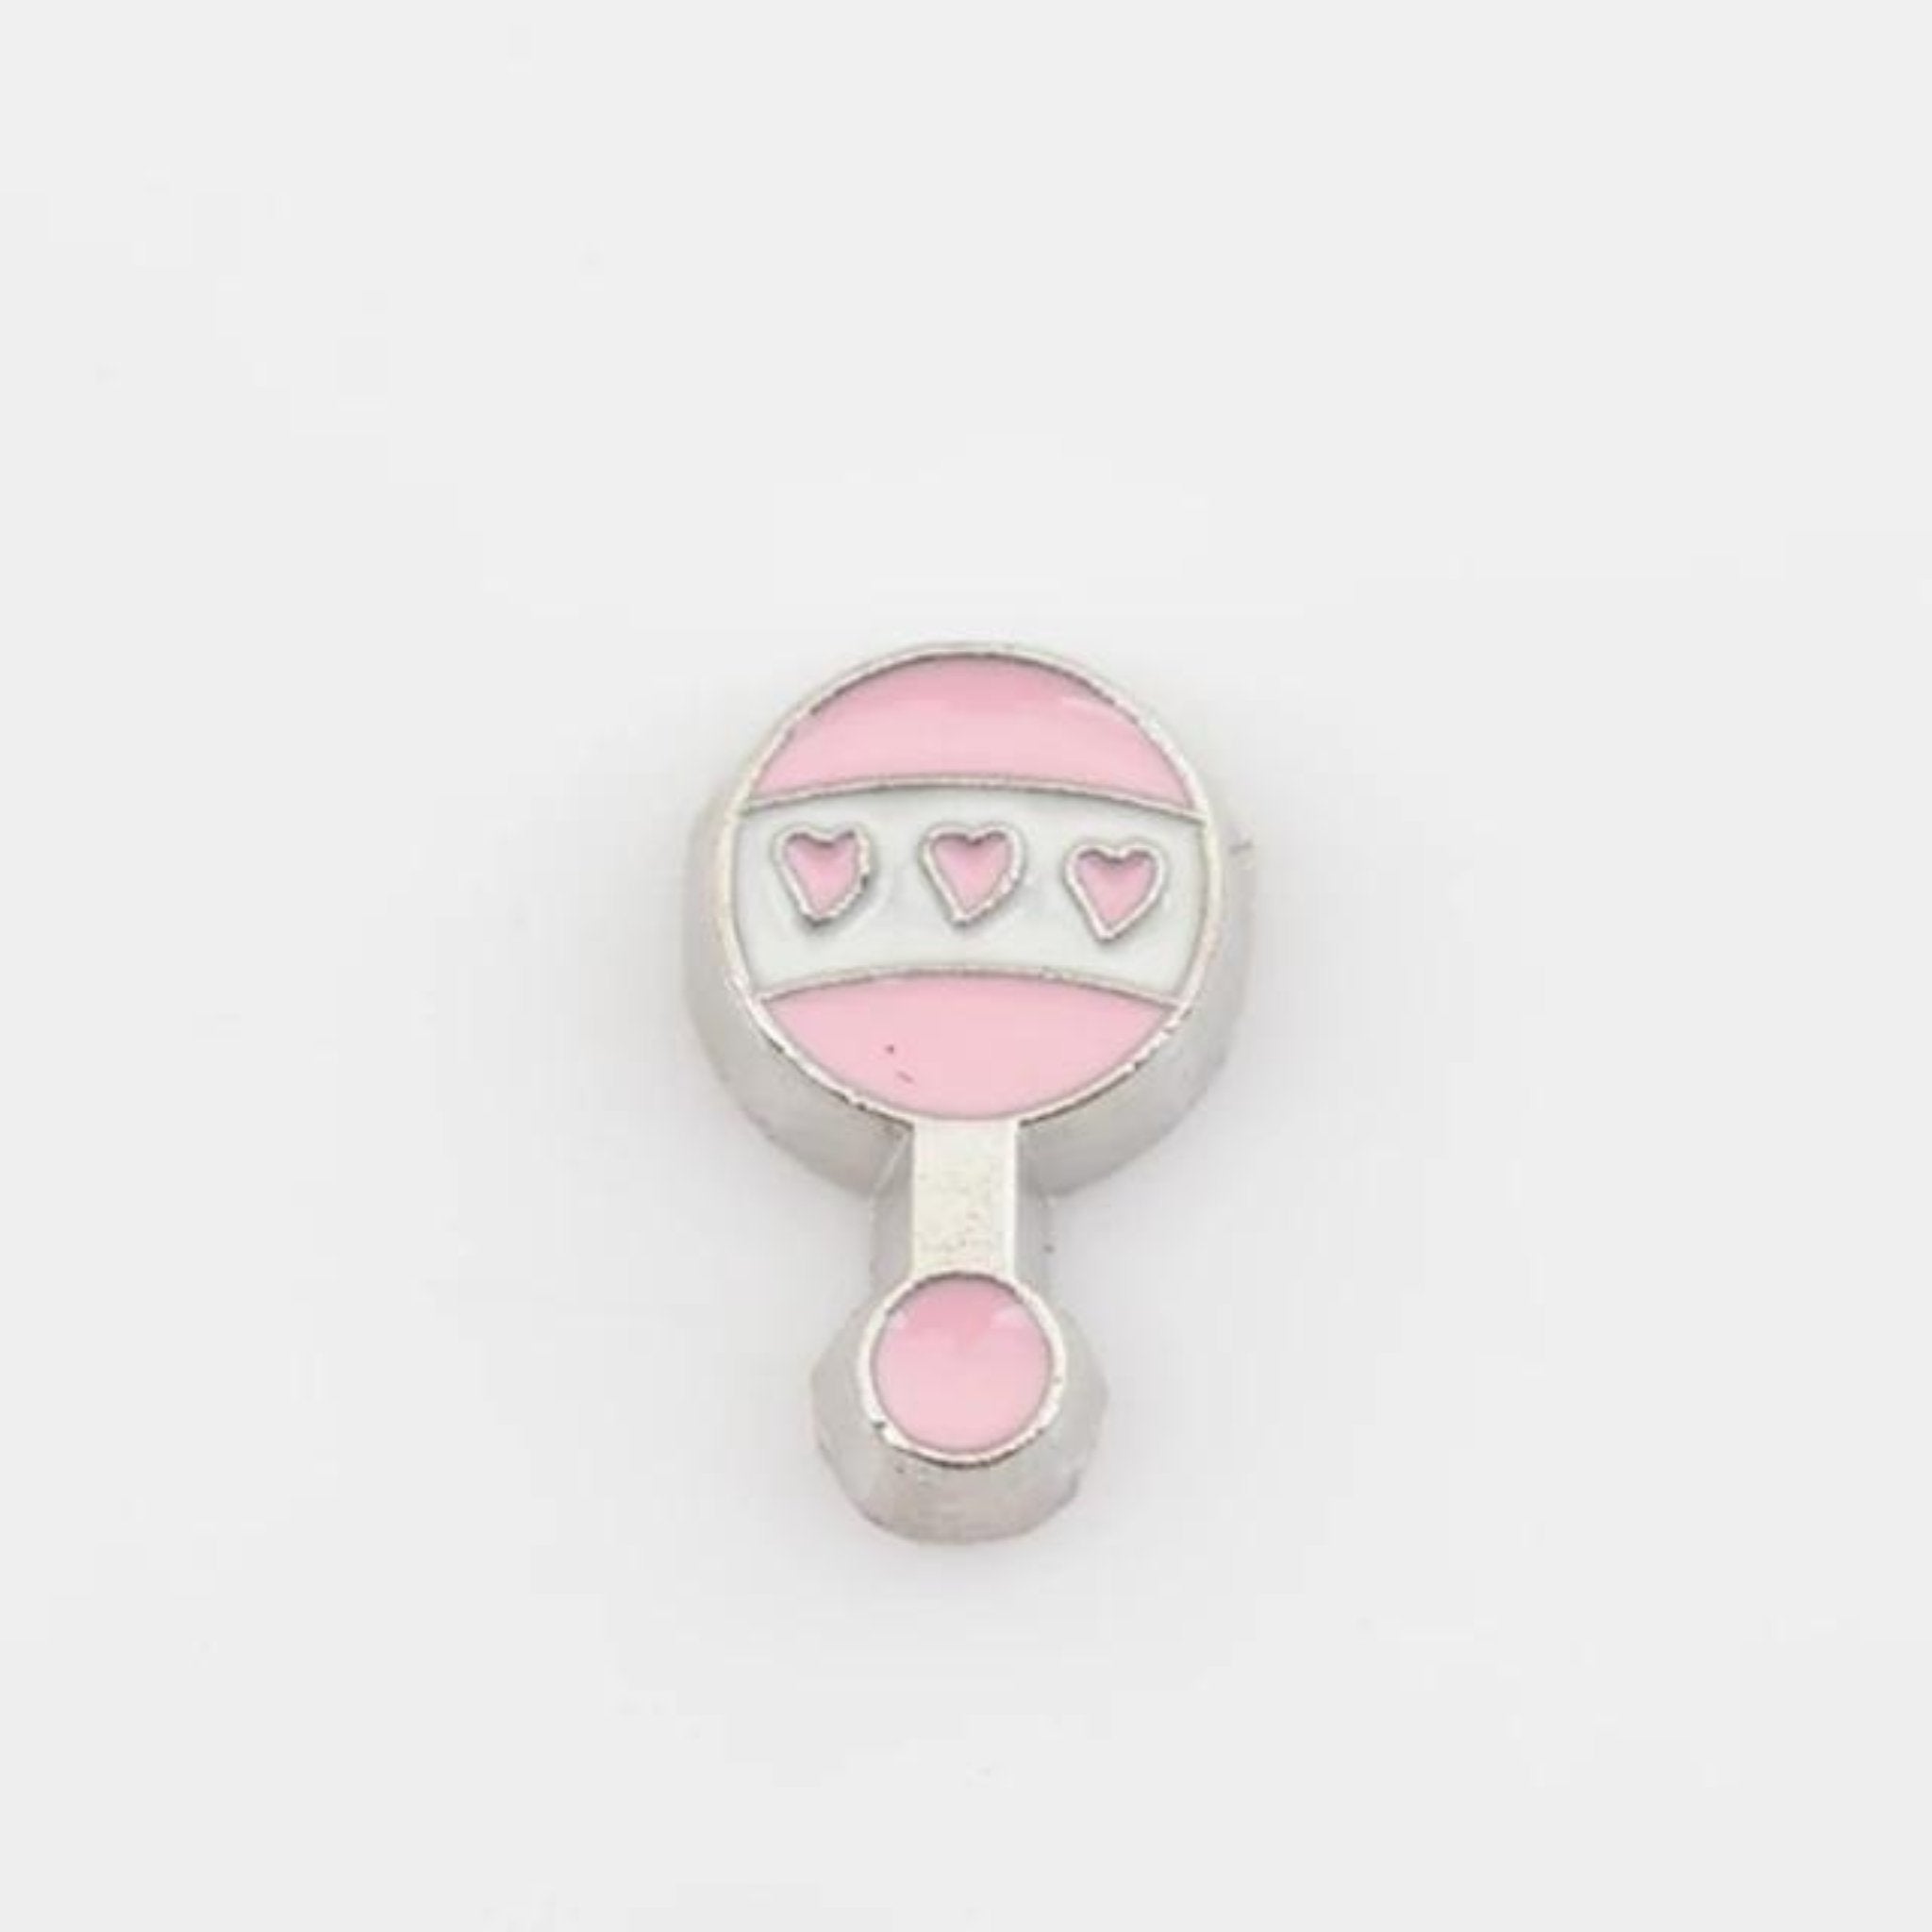 Memory Locket Charm - Baby’s Rattle (Pink)